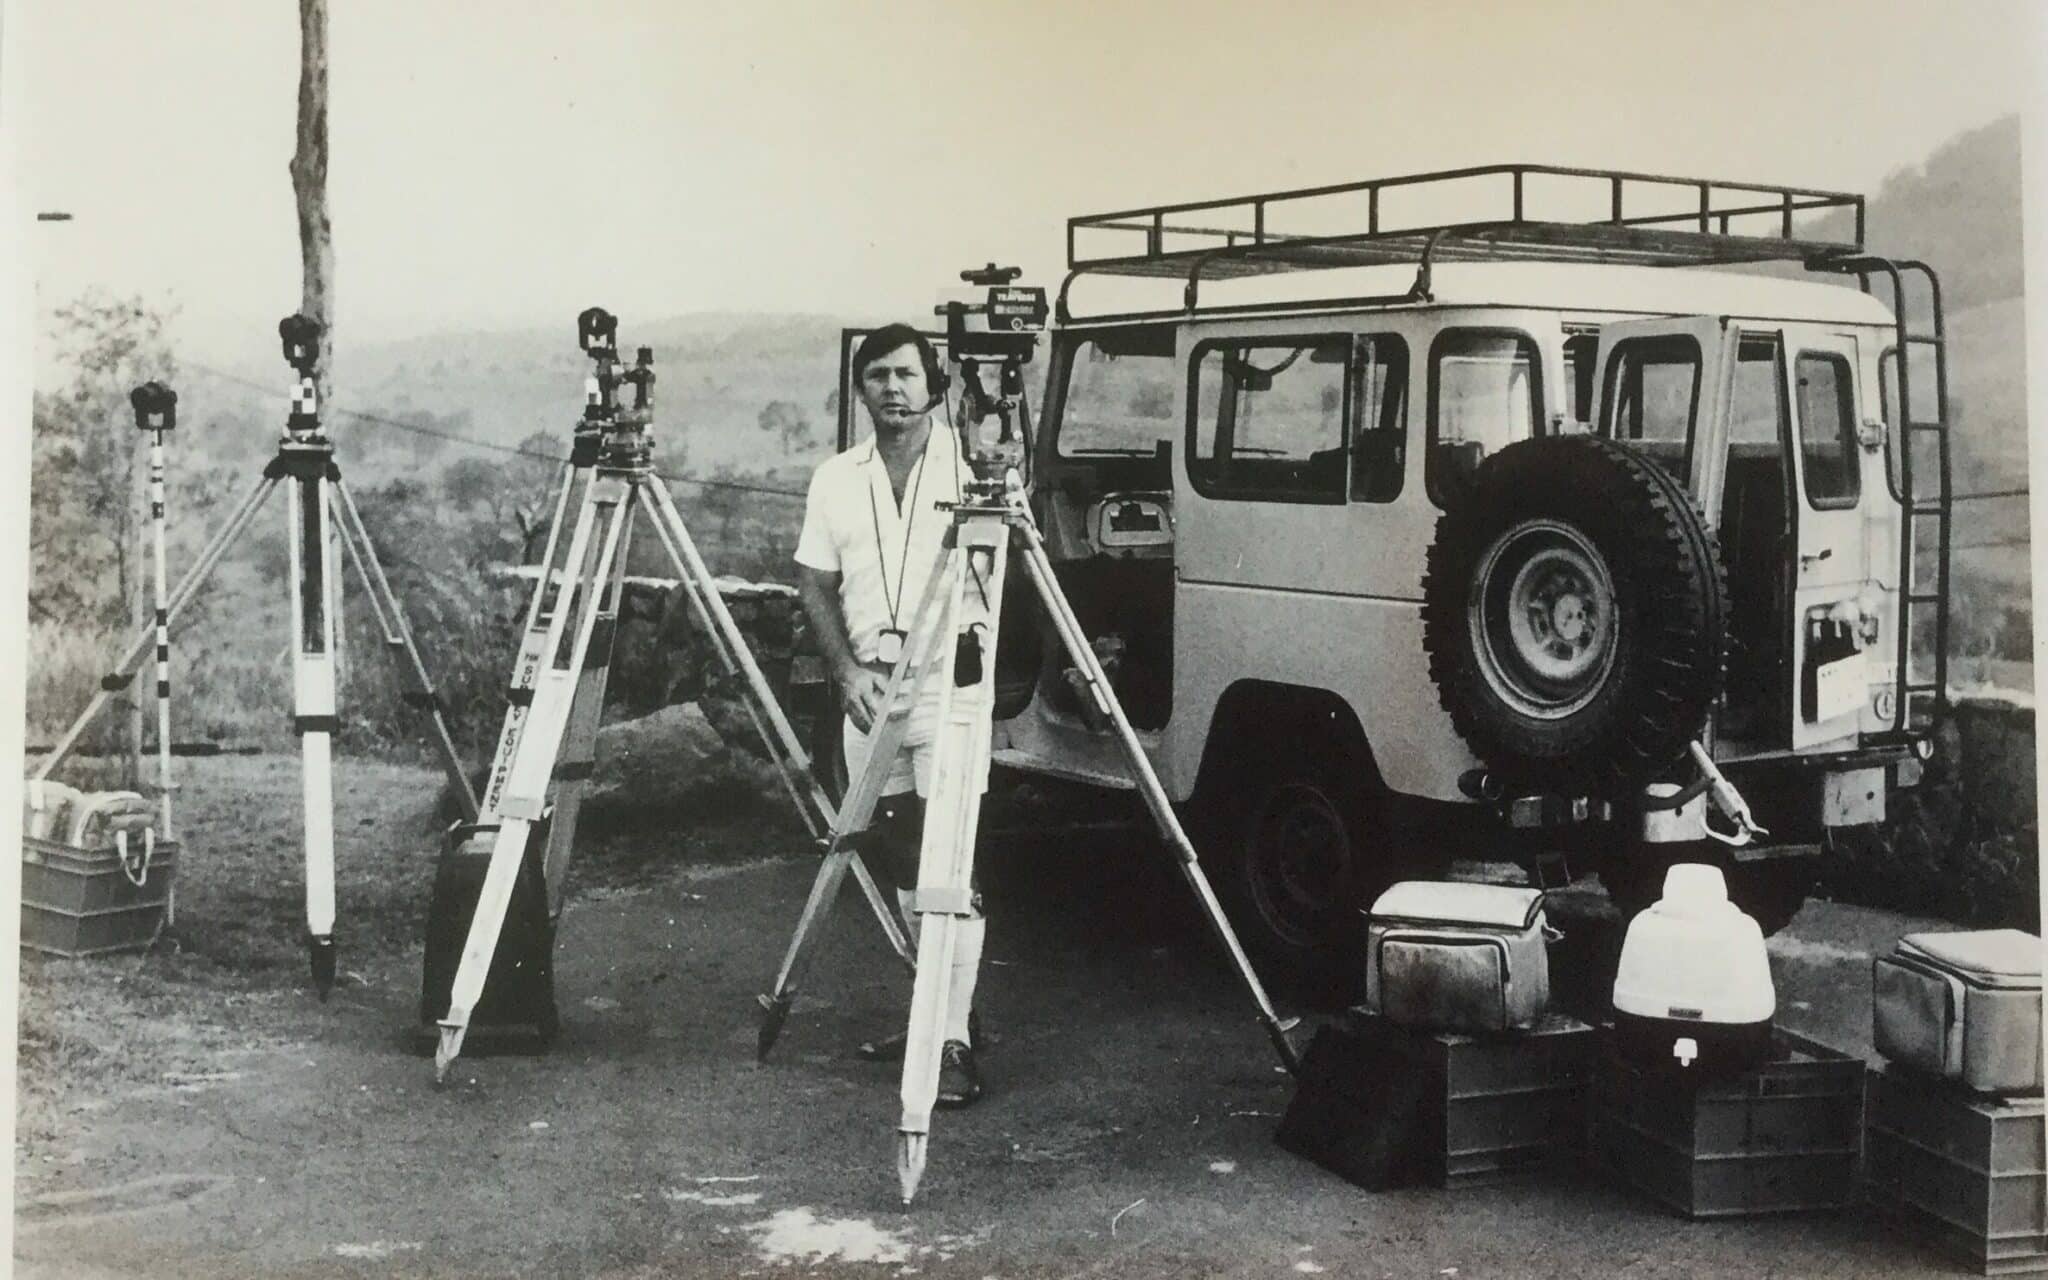 male standing behind several tripods with various survey equipment attached, taken outdoors beside a 4WD. Black & White image